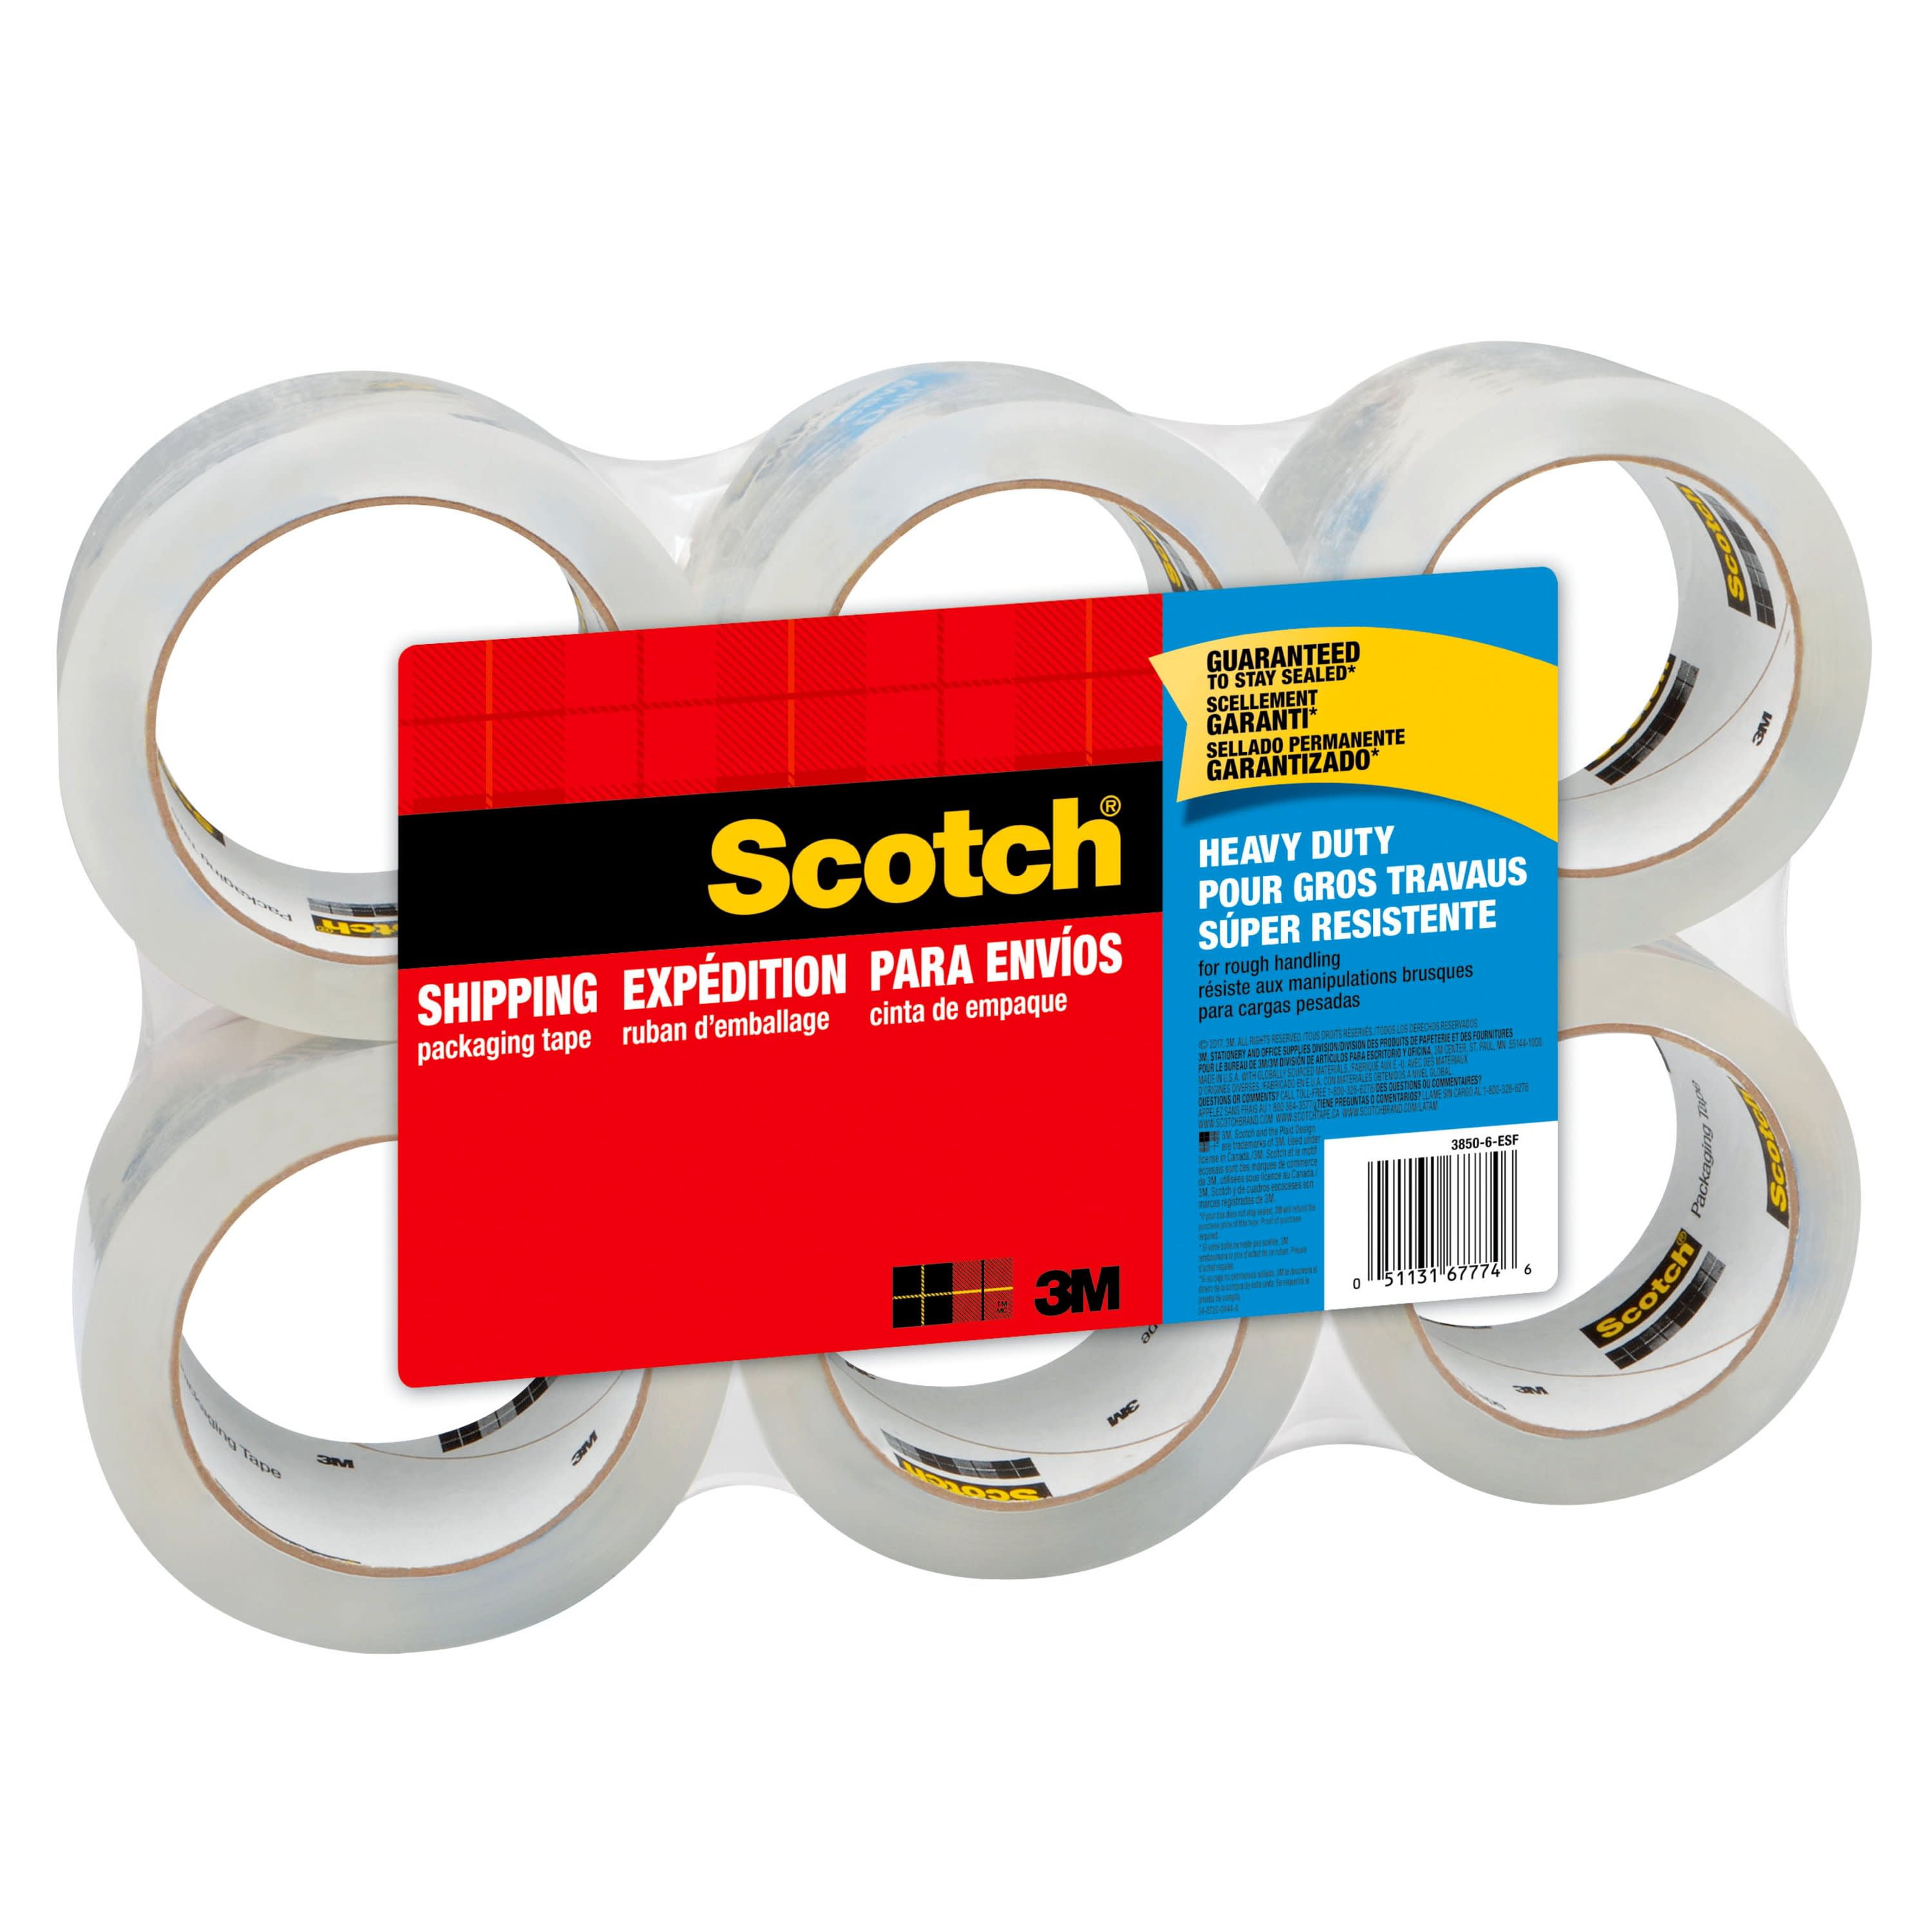 Save on 3M Scotch Shipping Packaging Tape Heavy Duty 1.88 x 1966